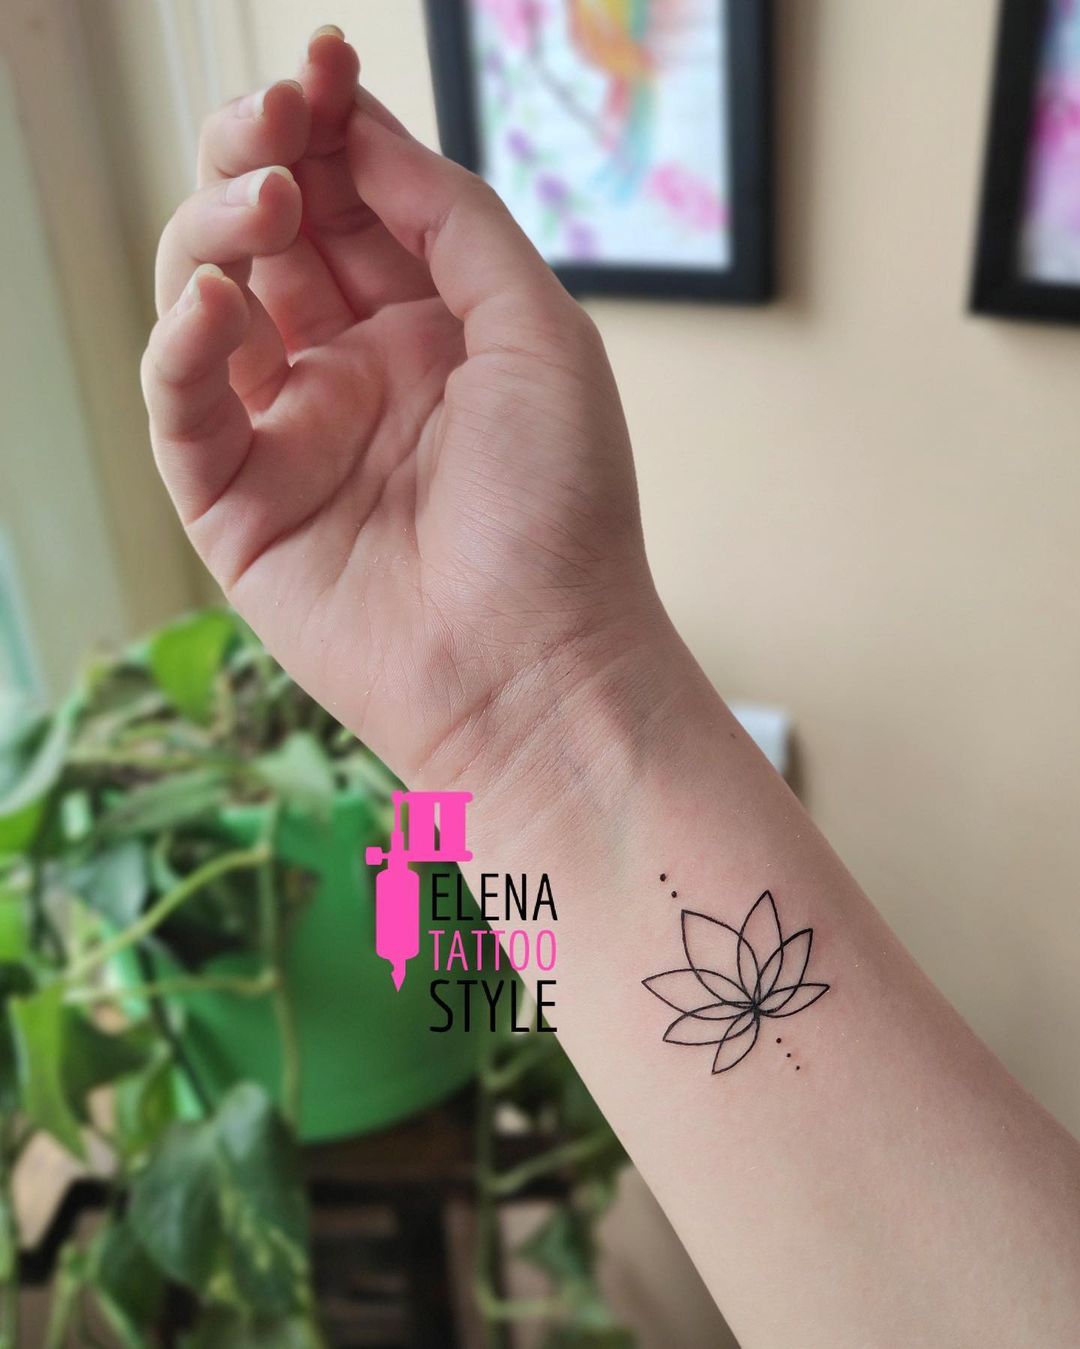 53 Delicate Wrist Tattoos For Your Upcoming Ink Session | Unique wrist  tattoos, Tattoos for daughters, Tattoos for women